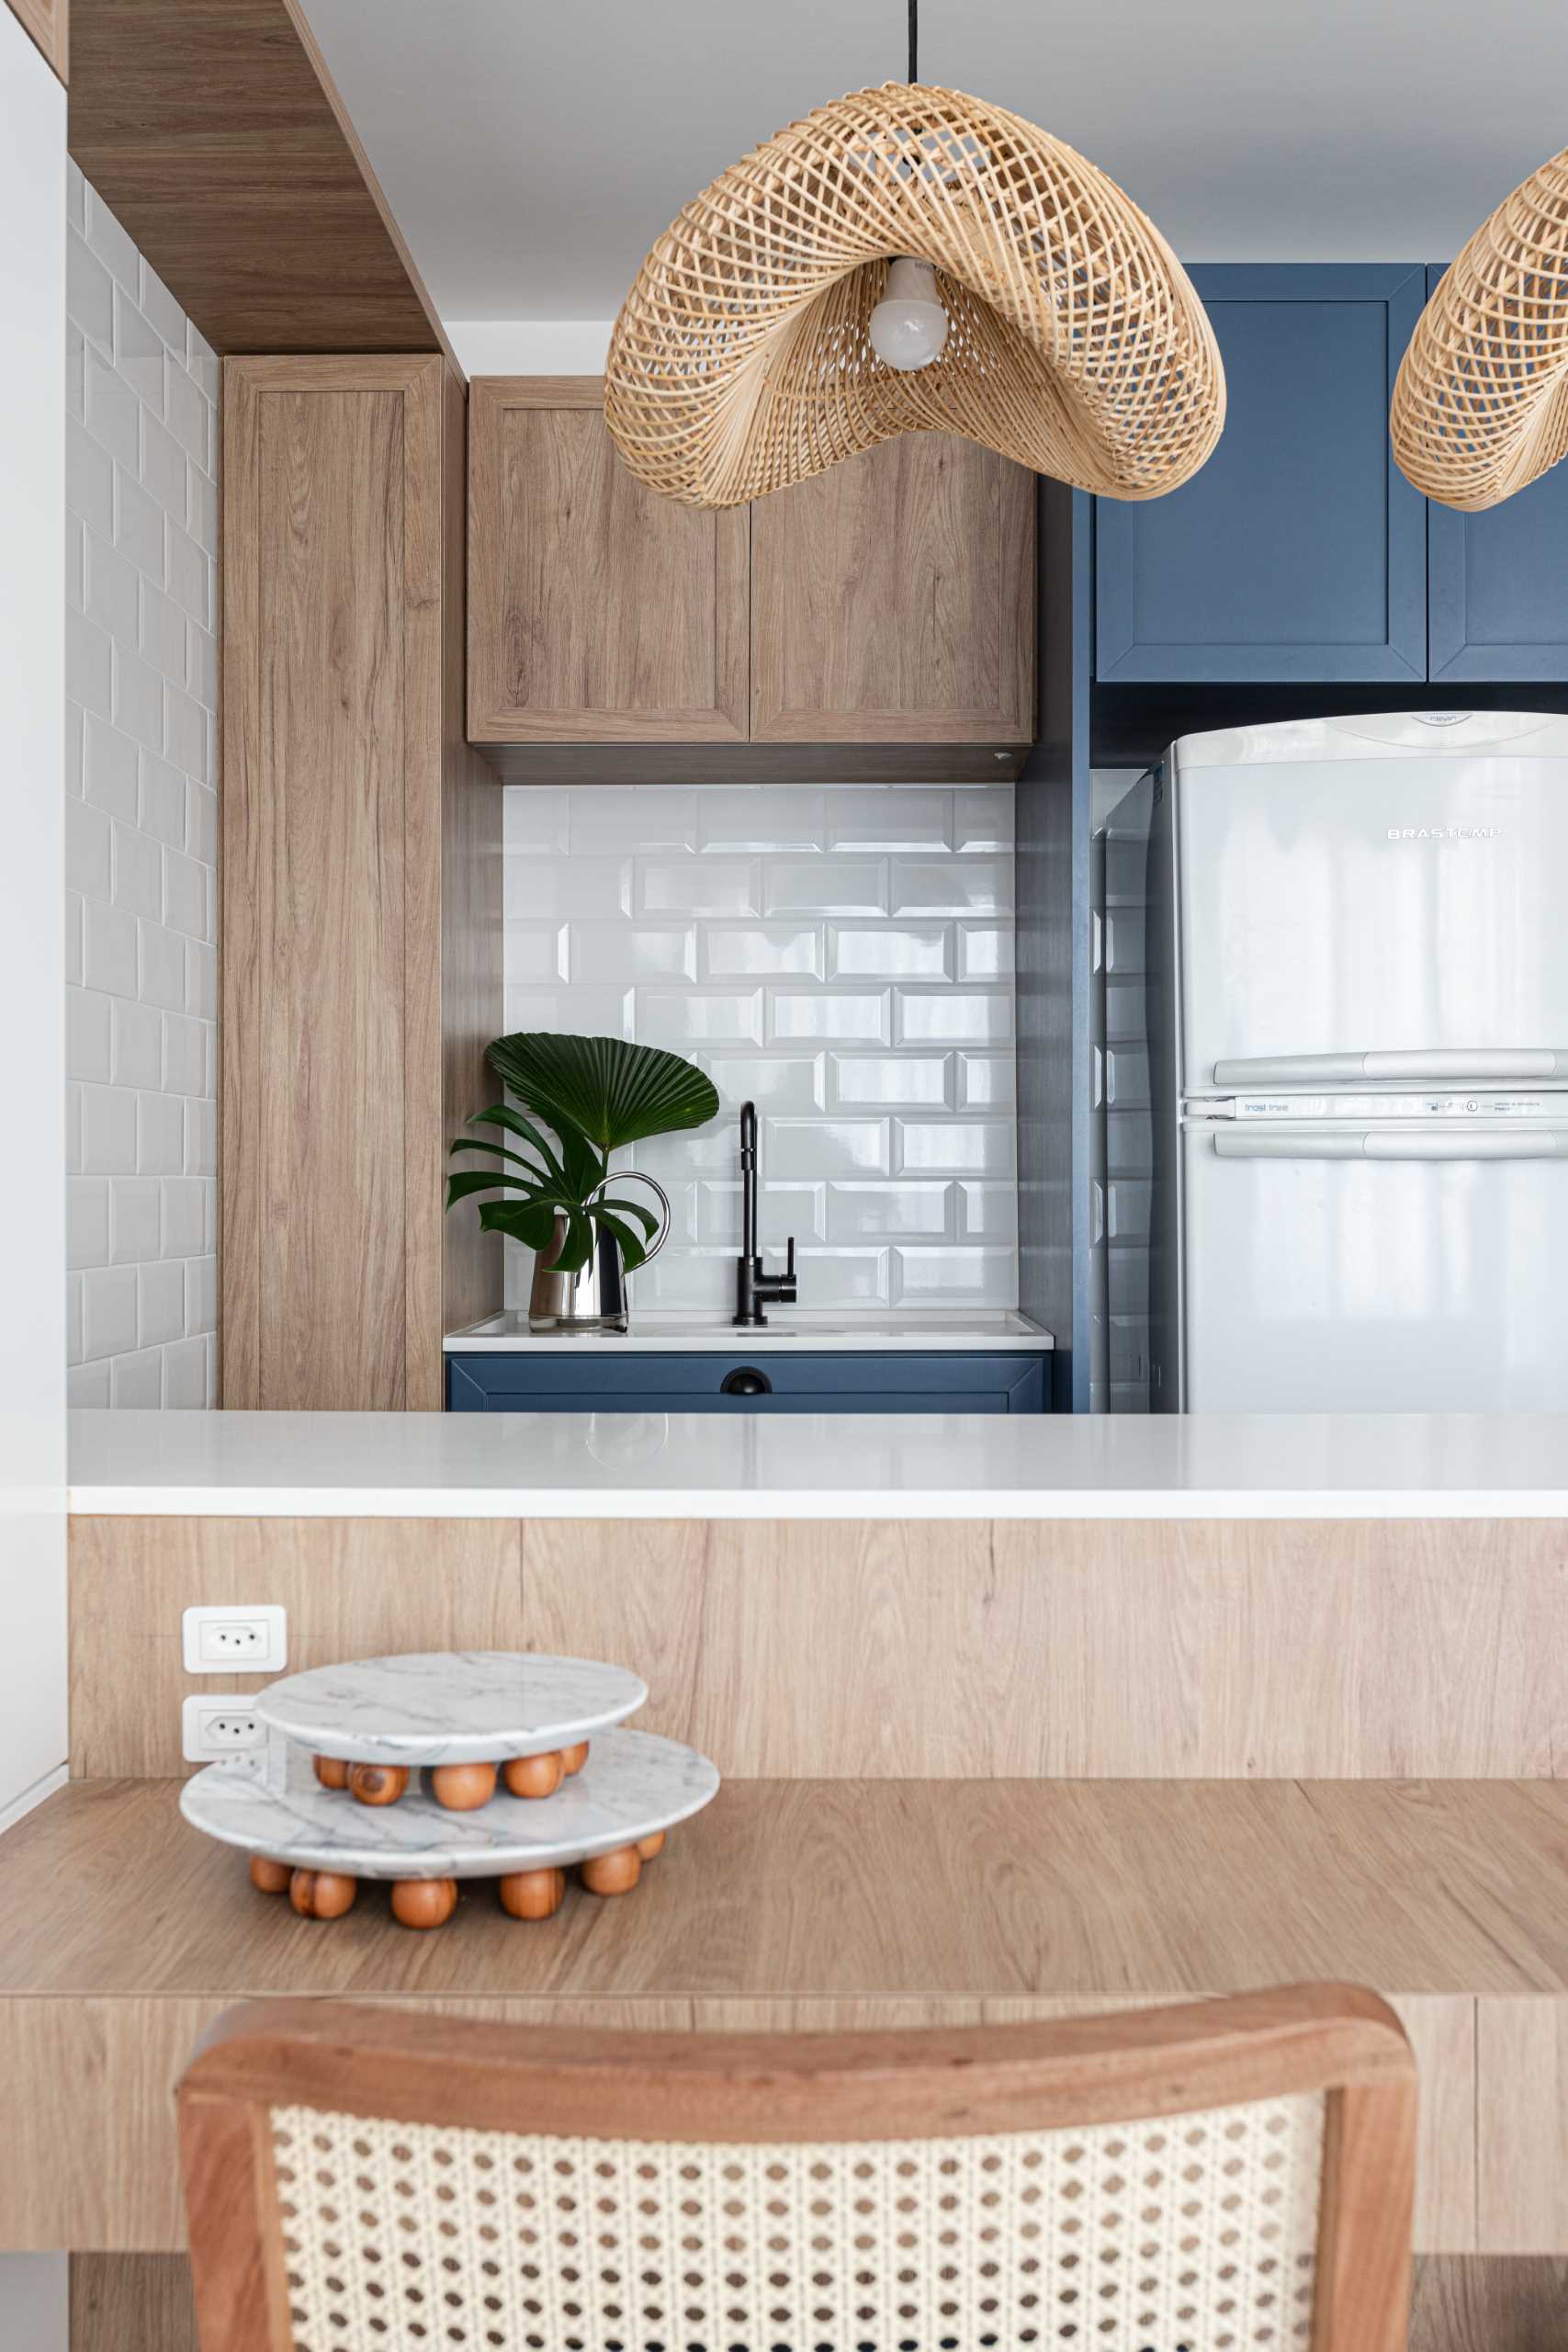 This small kitchen features wood and blue cabinets, white subway tile, and a pair of woven pendant lights.